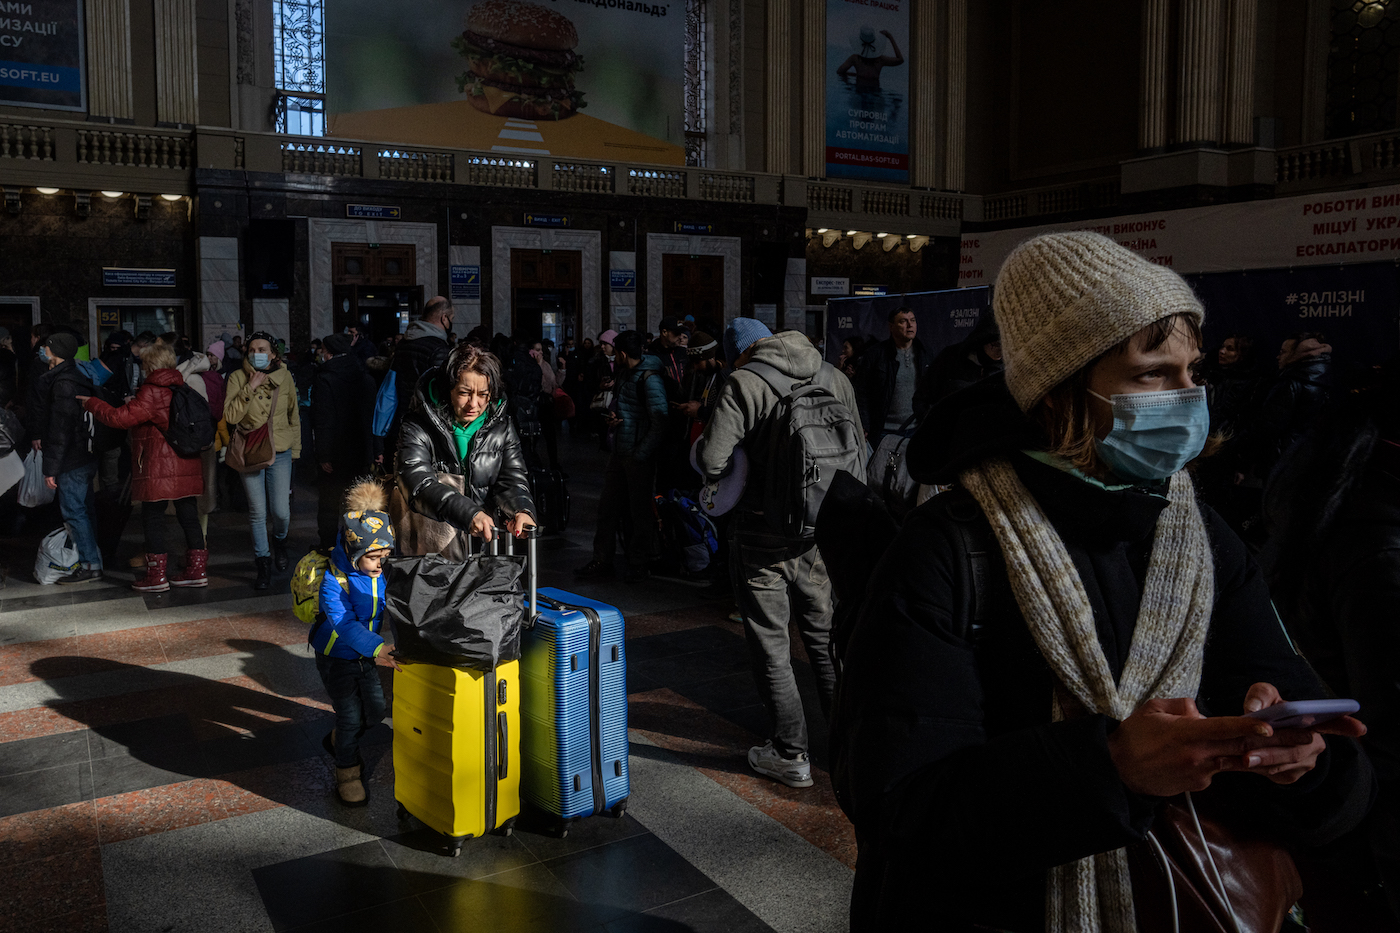 A mother and her child flee Kyiv through the central train station of the city. Kyiv, Ukraine in February, 2022 Wolfgang Schwan